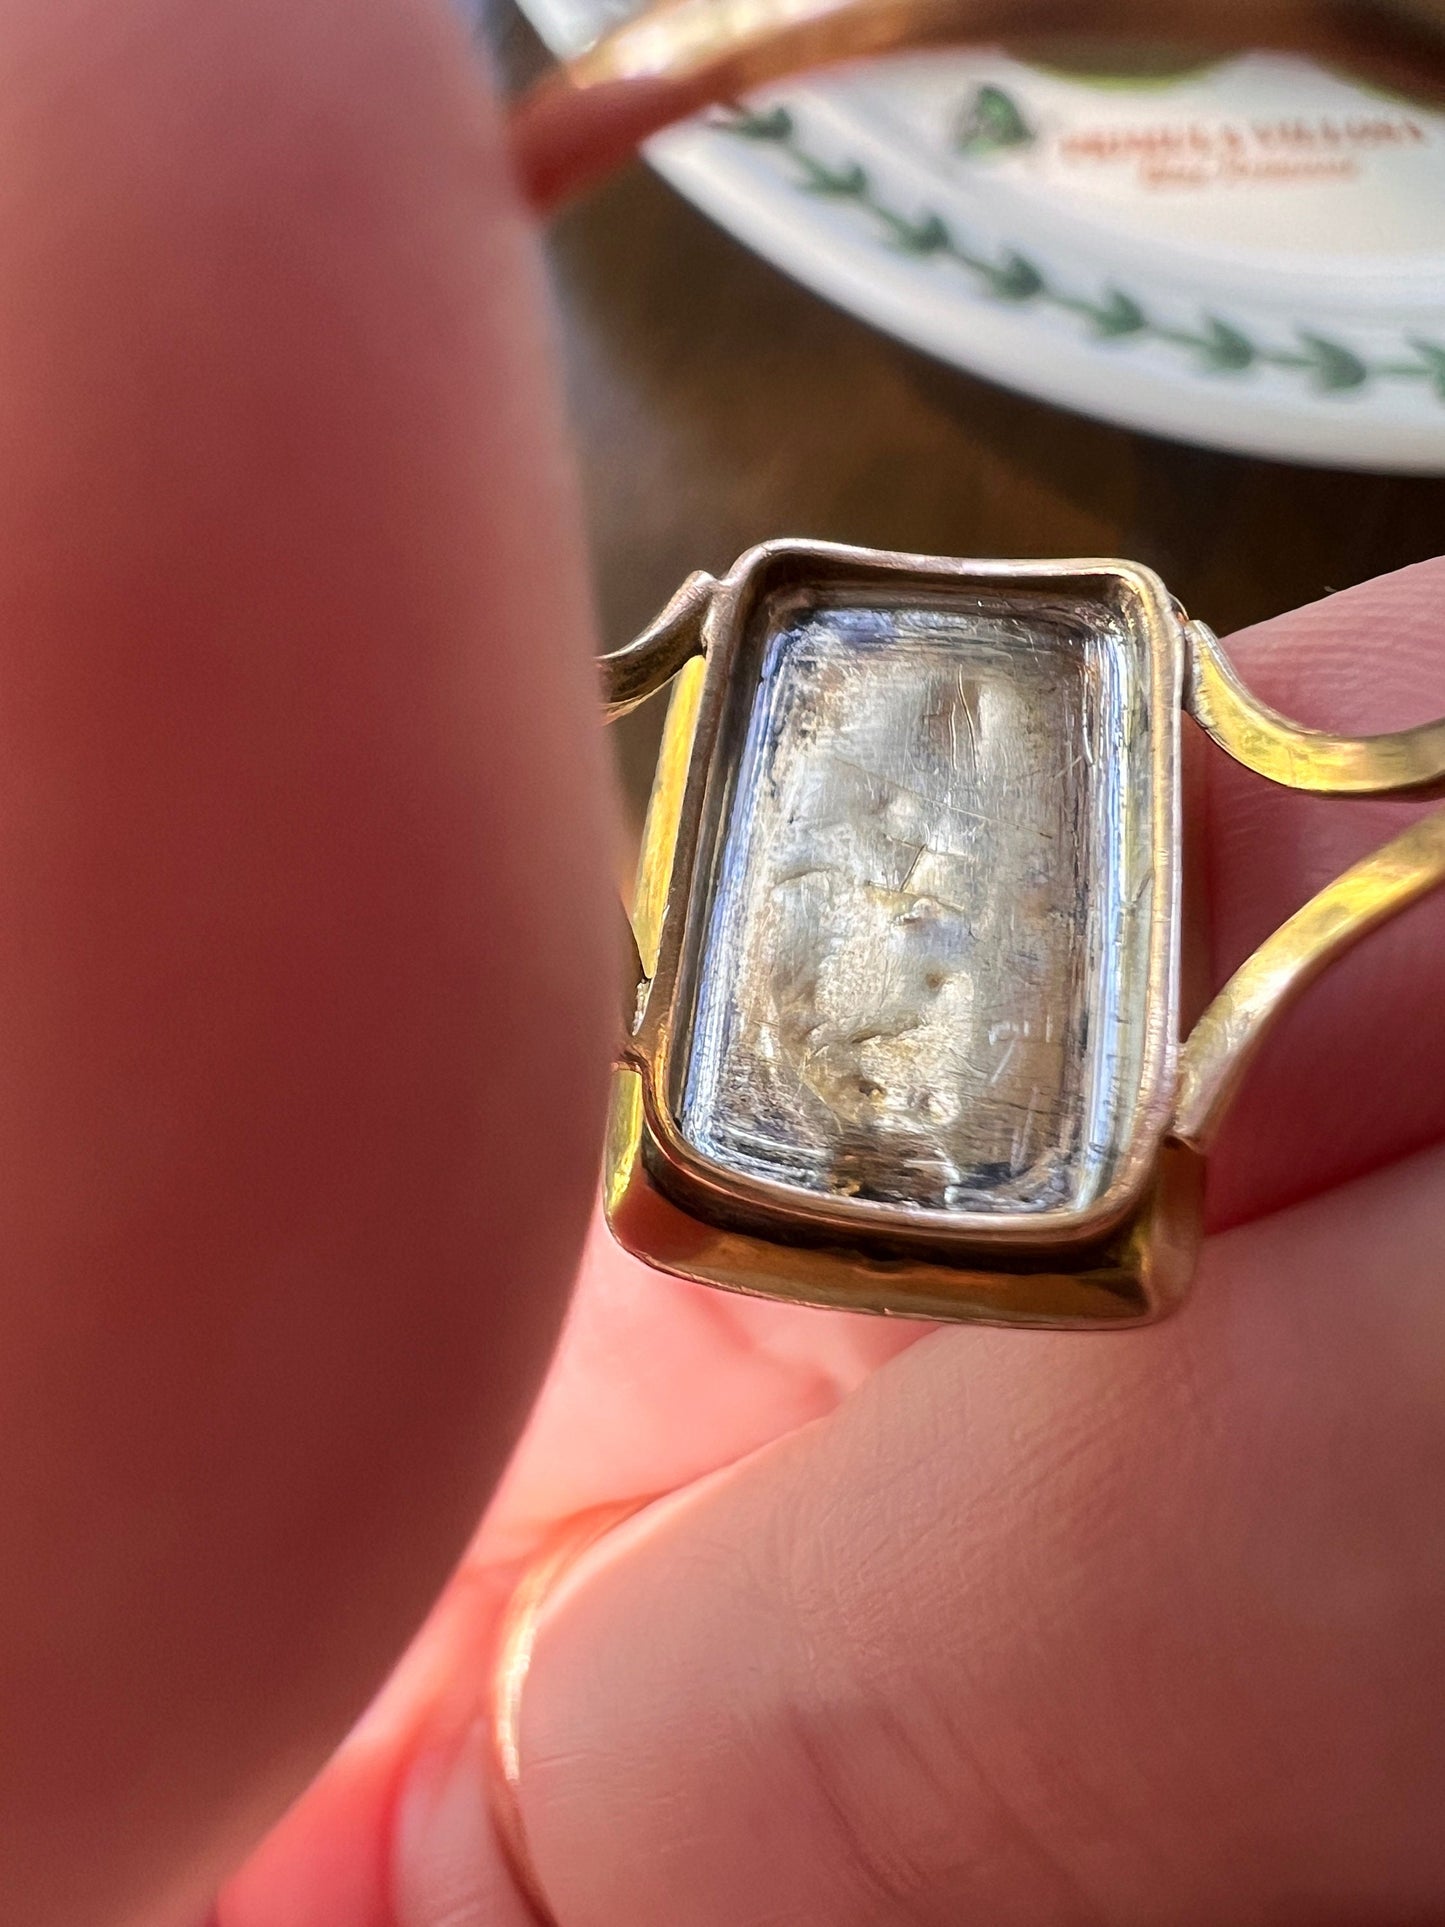 LOVER'S EYE Rare Victorian - Georgian Antique 15k Gold Ring Floral Embossed Halo Rectangle Chunky Locket Face Romantic Gift Collectible 14k